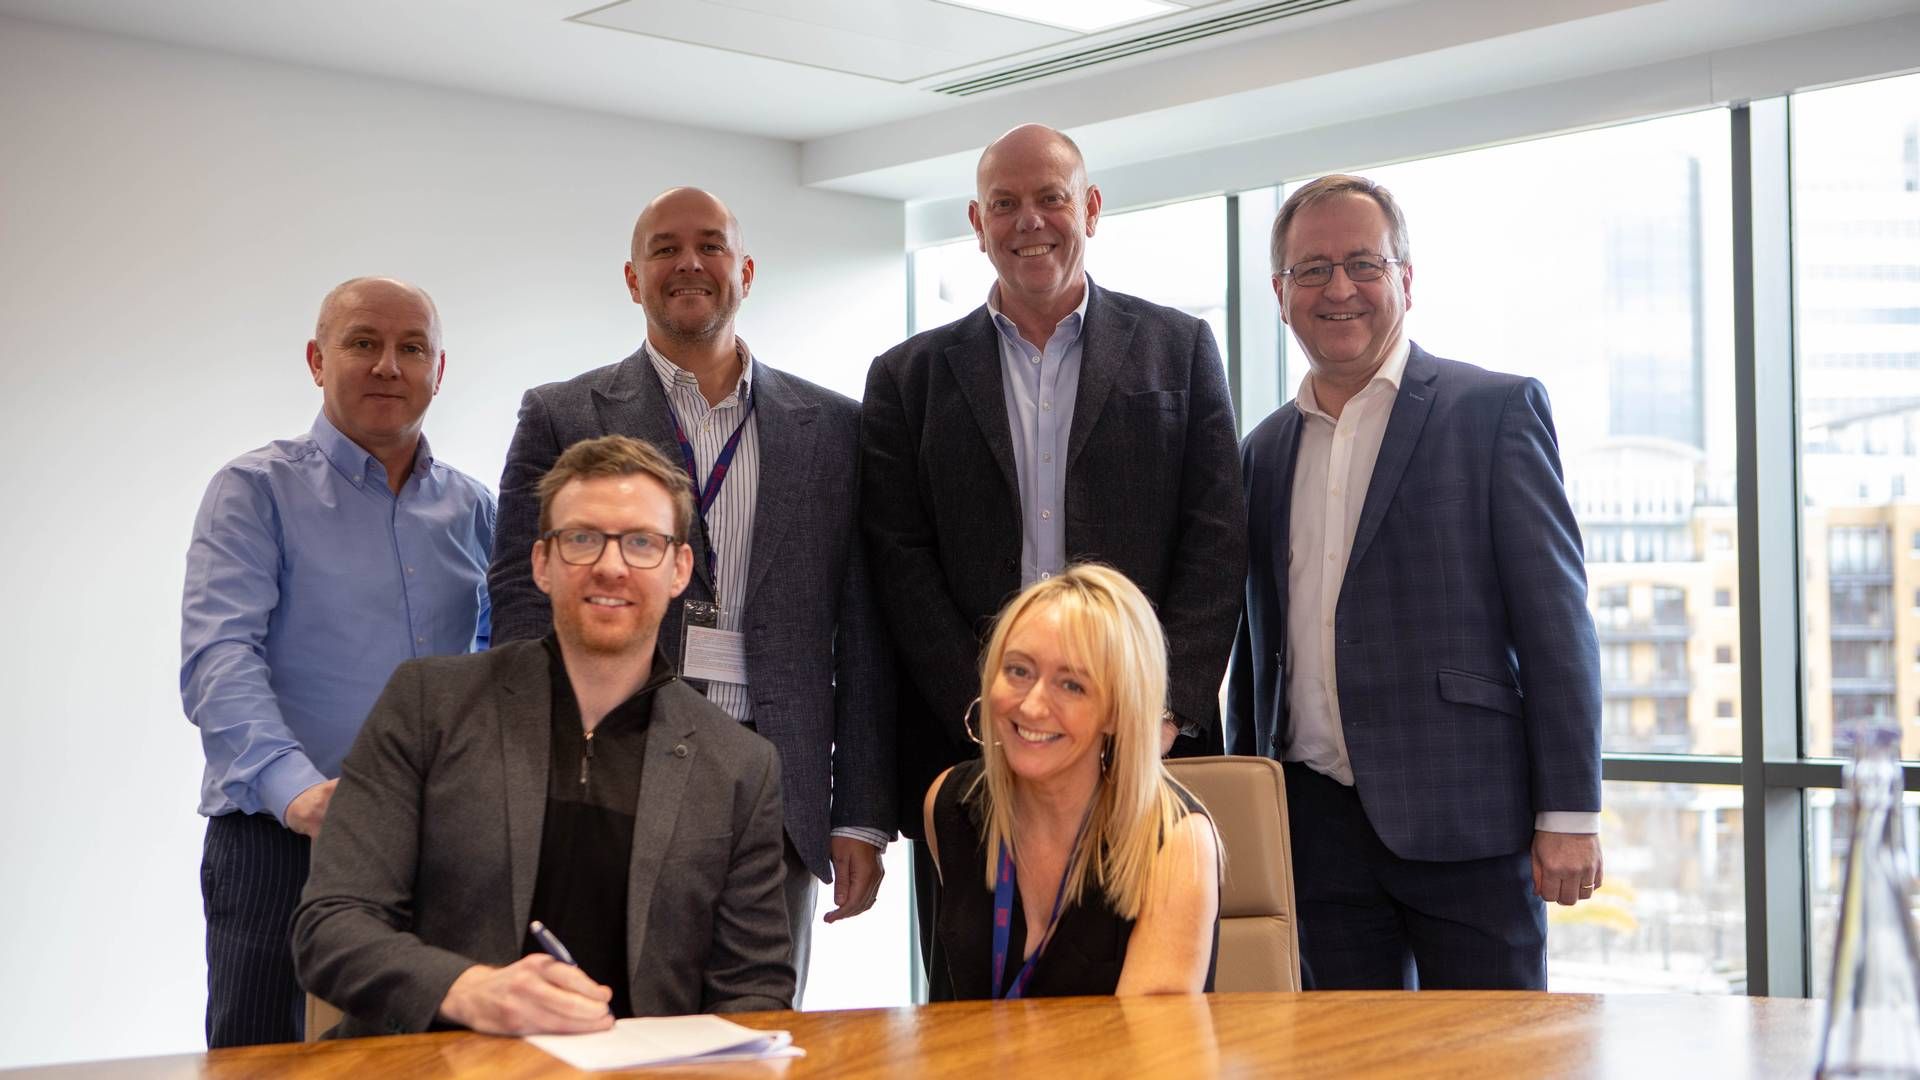 The deal was signed this week by Clarksons and Trauma Resus. | Photo: Clarksons